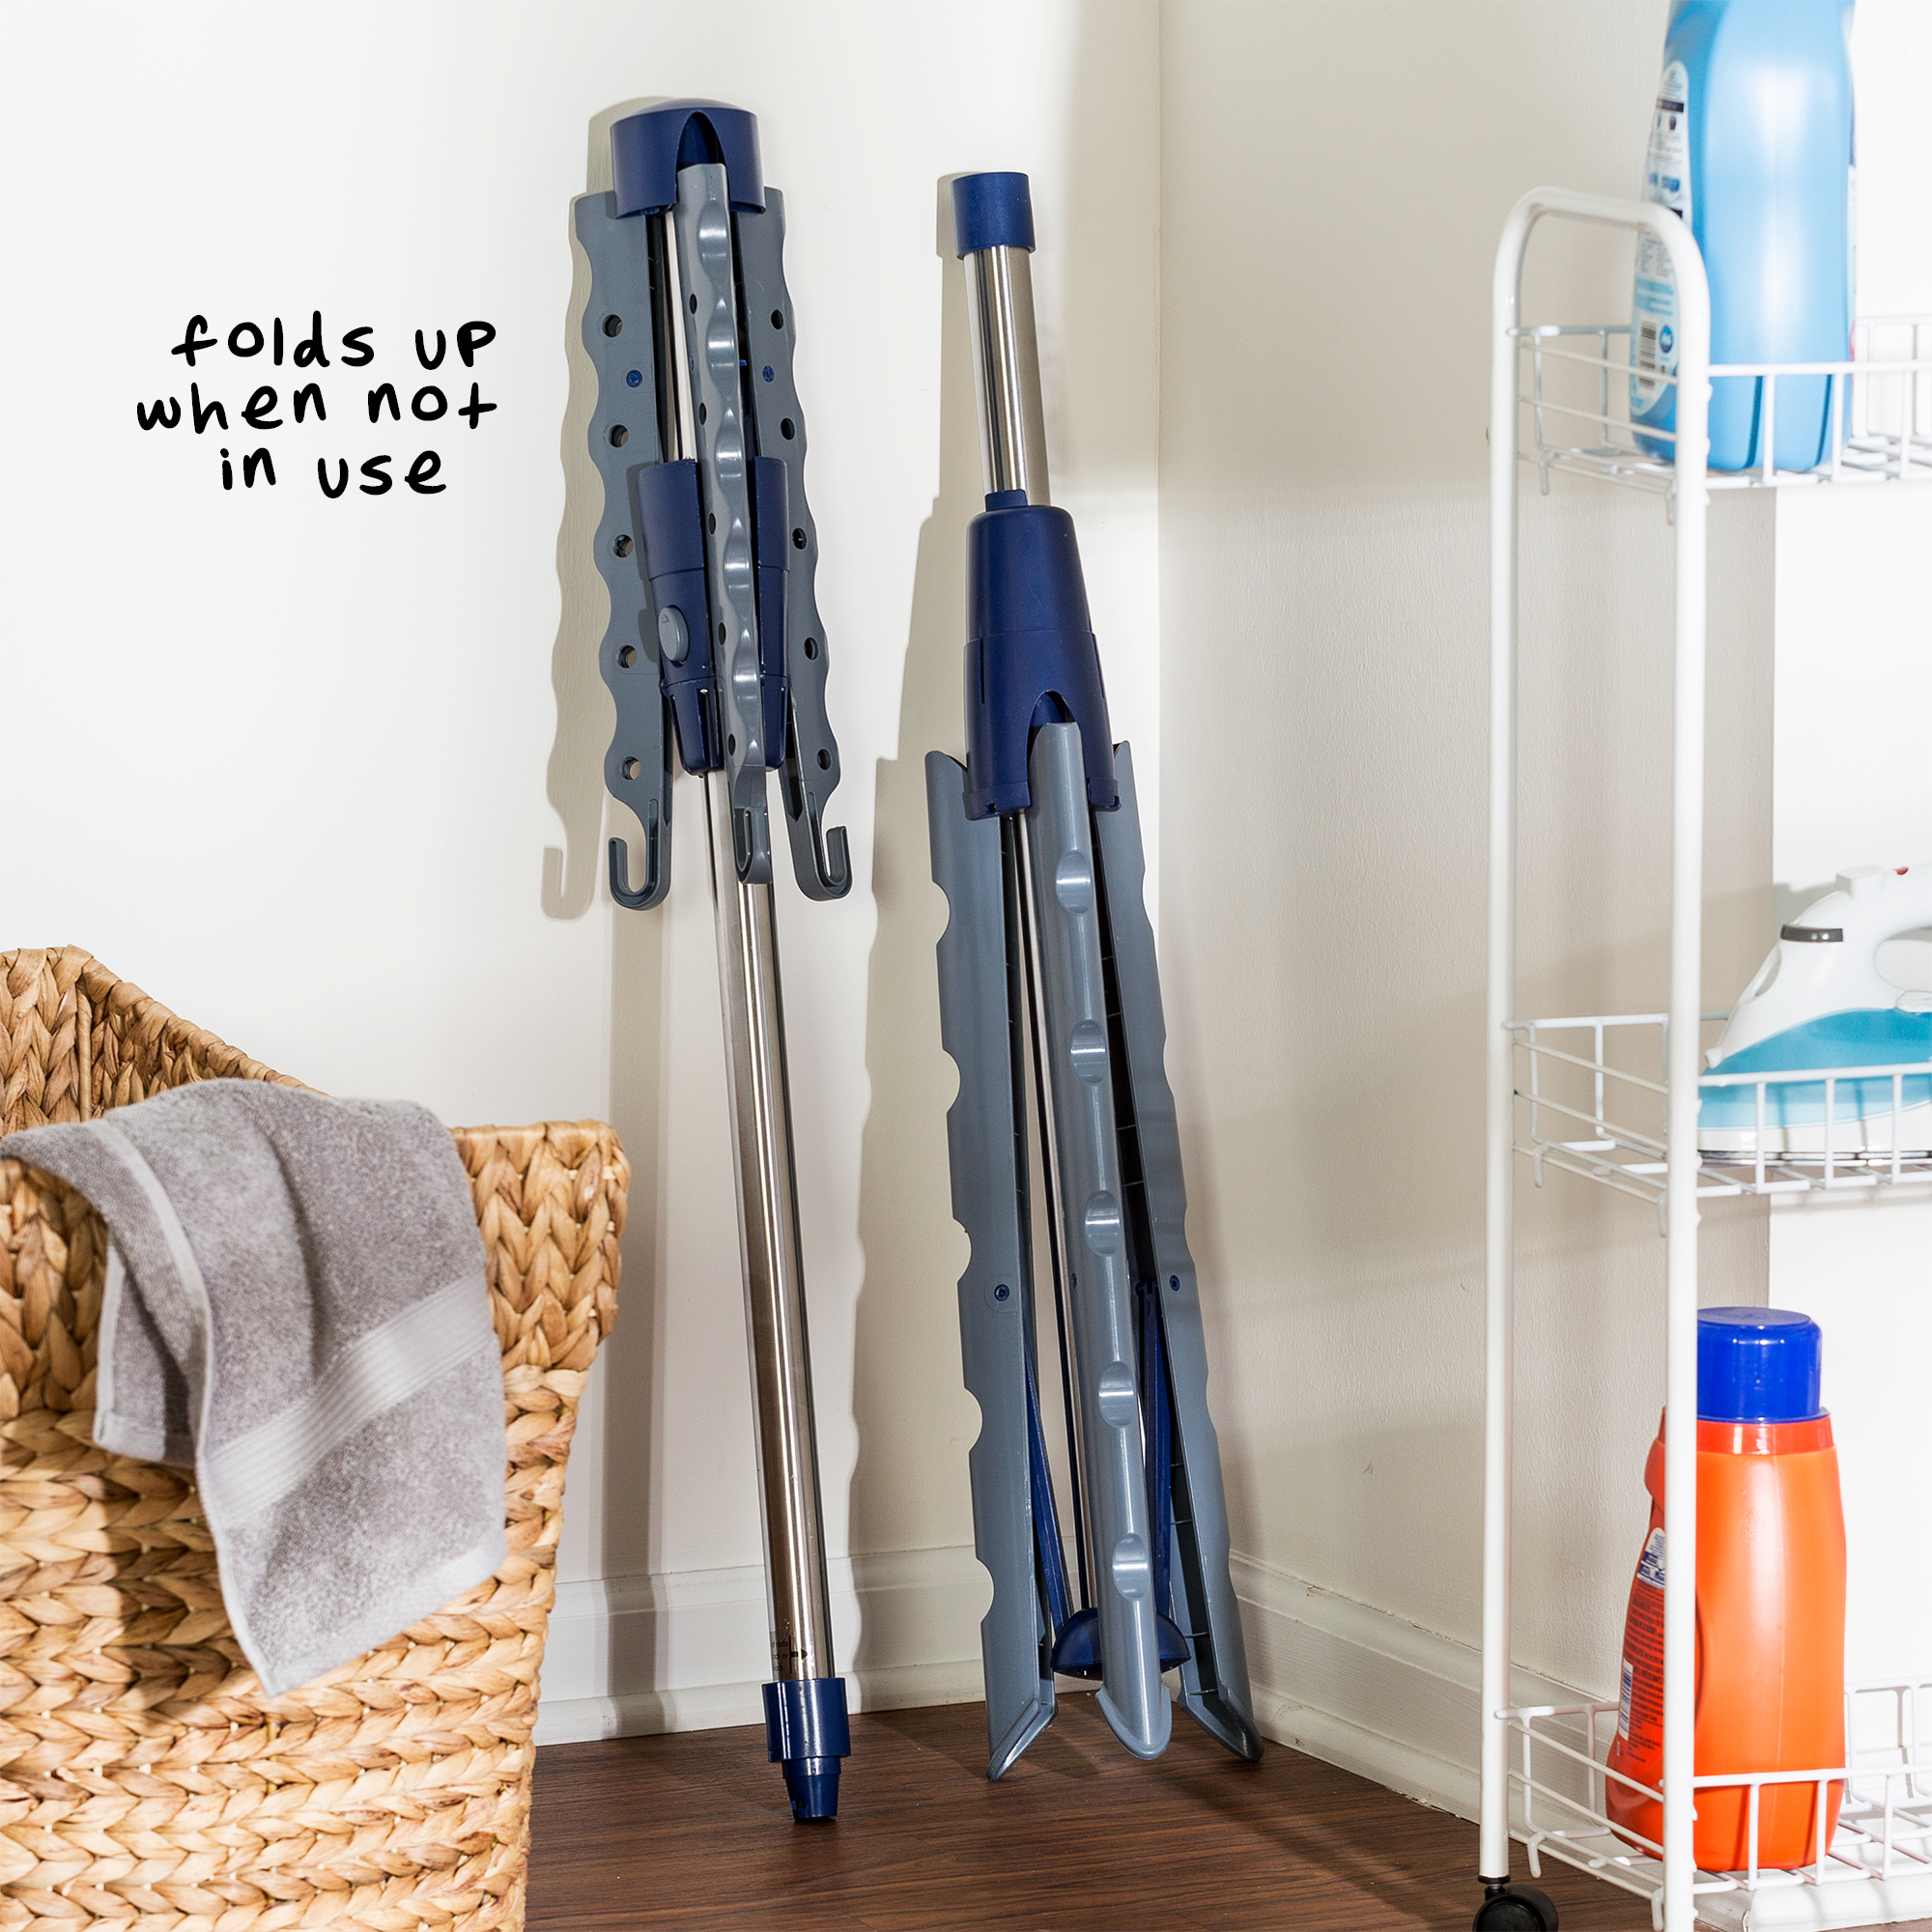 Honey-Can-Do Collapsible Steel Freestanding Tripod Clothes Drying Rack, Chrome/Blue - image 5 of 5